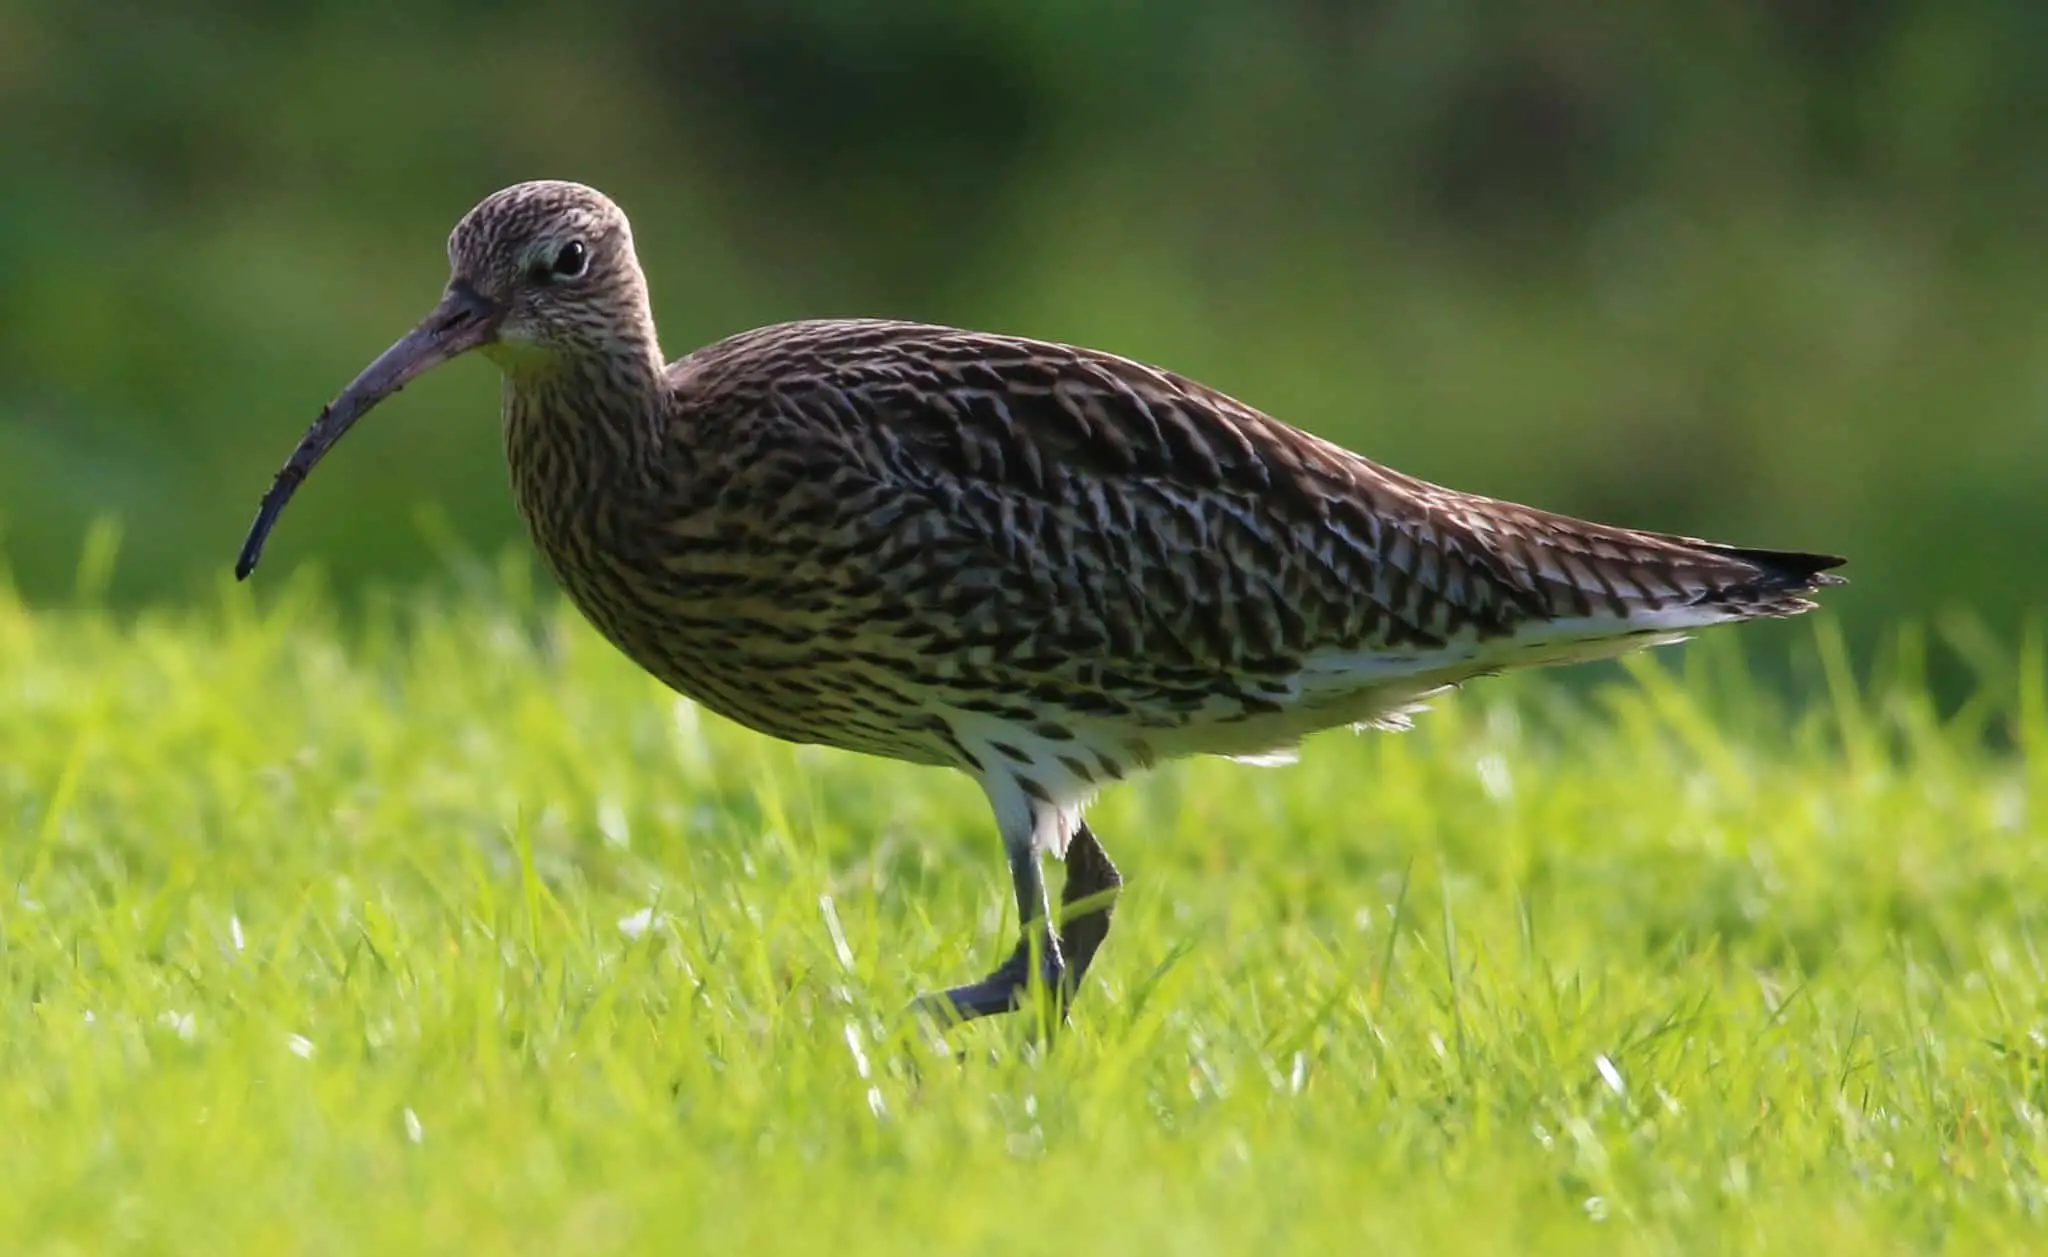 Curlew on green grass